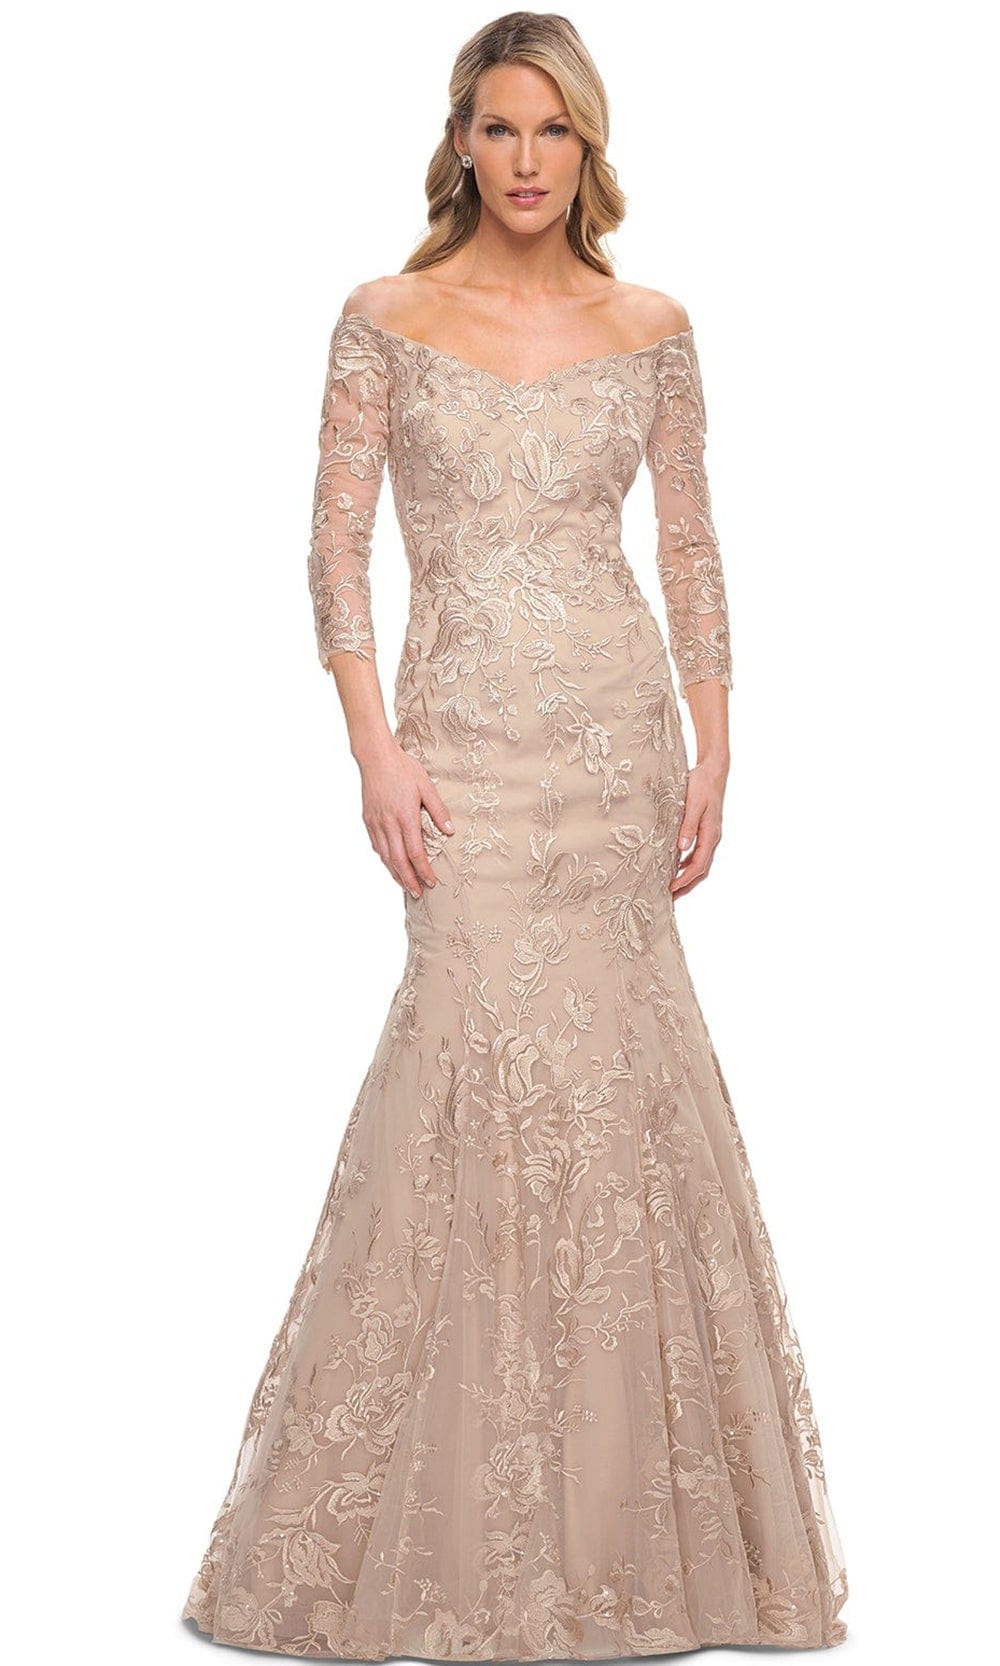 La Femme 30164 - Embroidered Mermaid Mother of the Bride Dress
